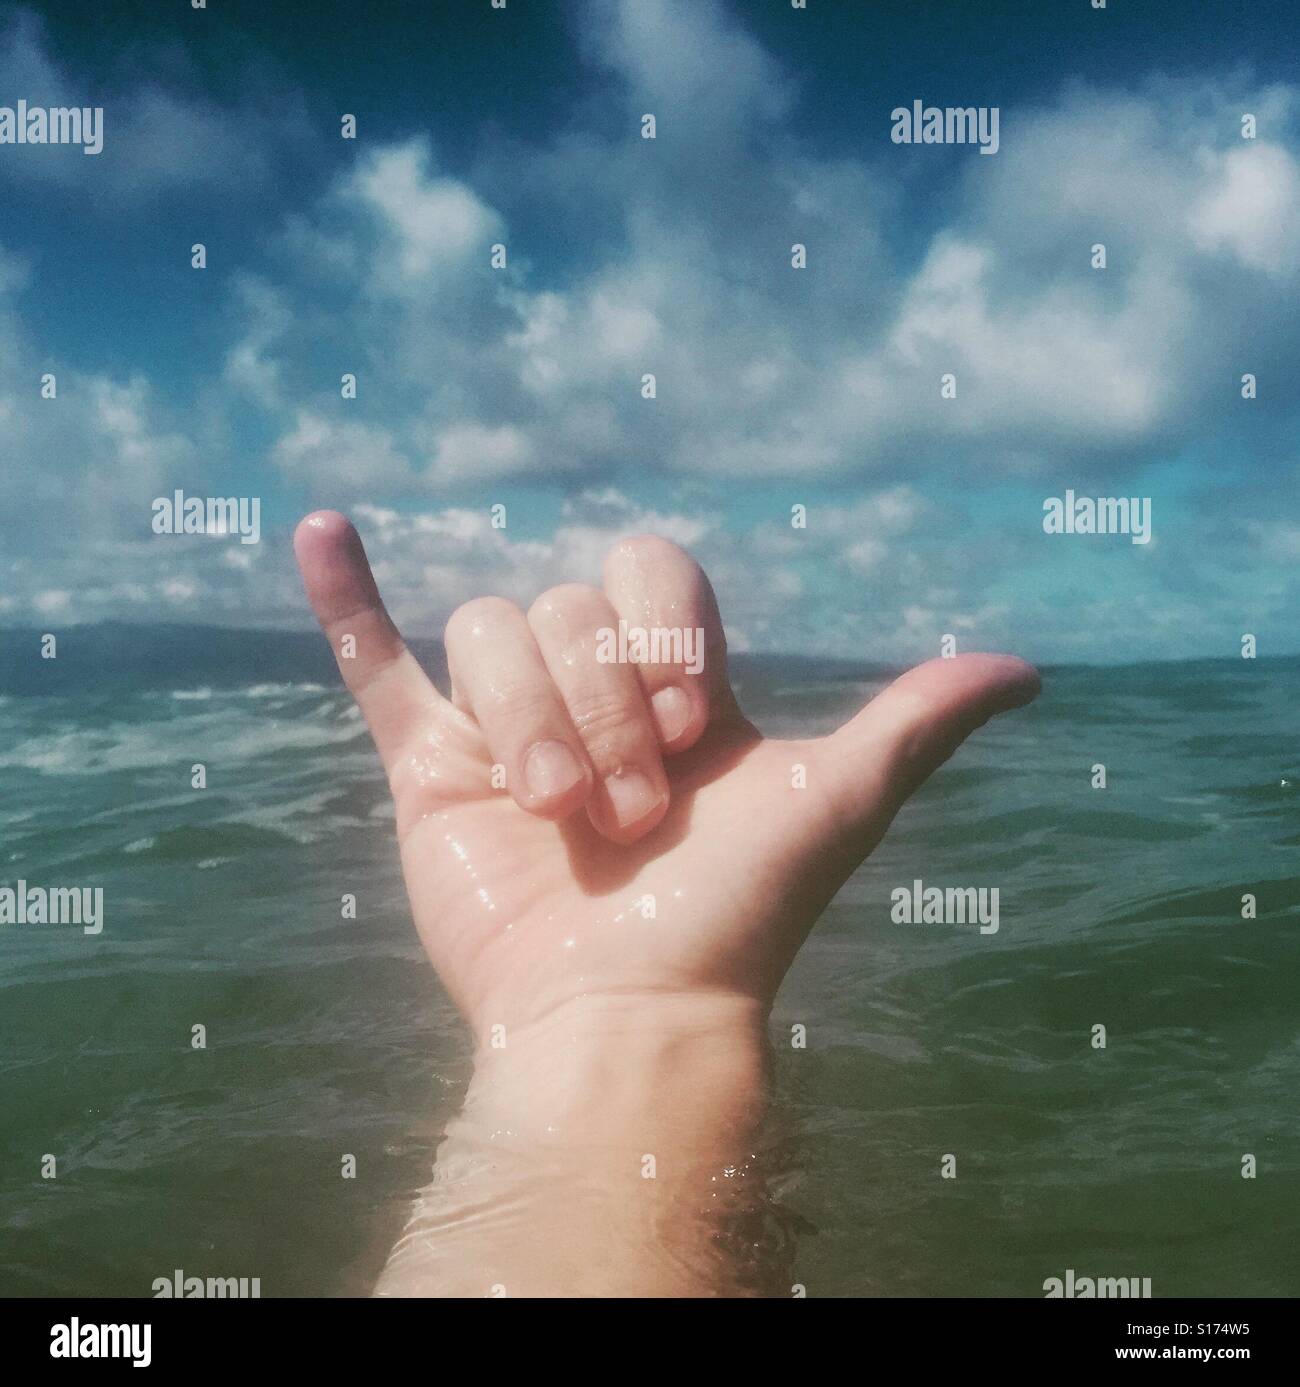 A right hand giving the Shaka sign.  The shaka sign, sometimes known as 'hang loose', is a gesture of friendly intent often associated with Hawaii and surf culture. Maui, Hawaii, USA. Stock Photo